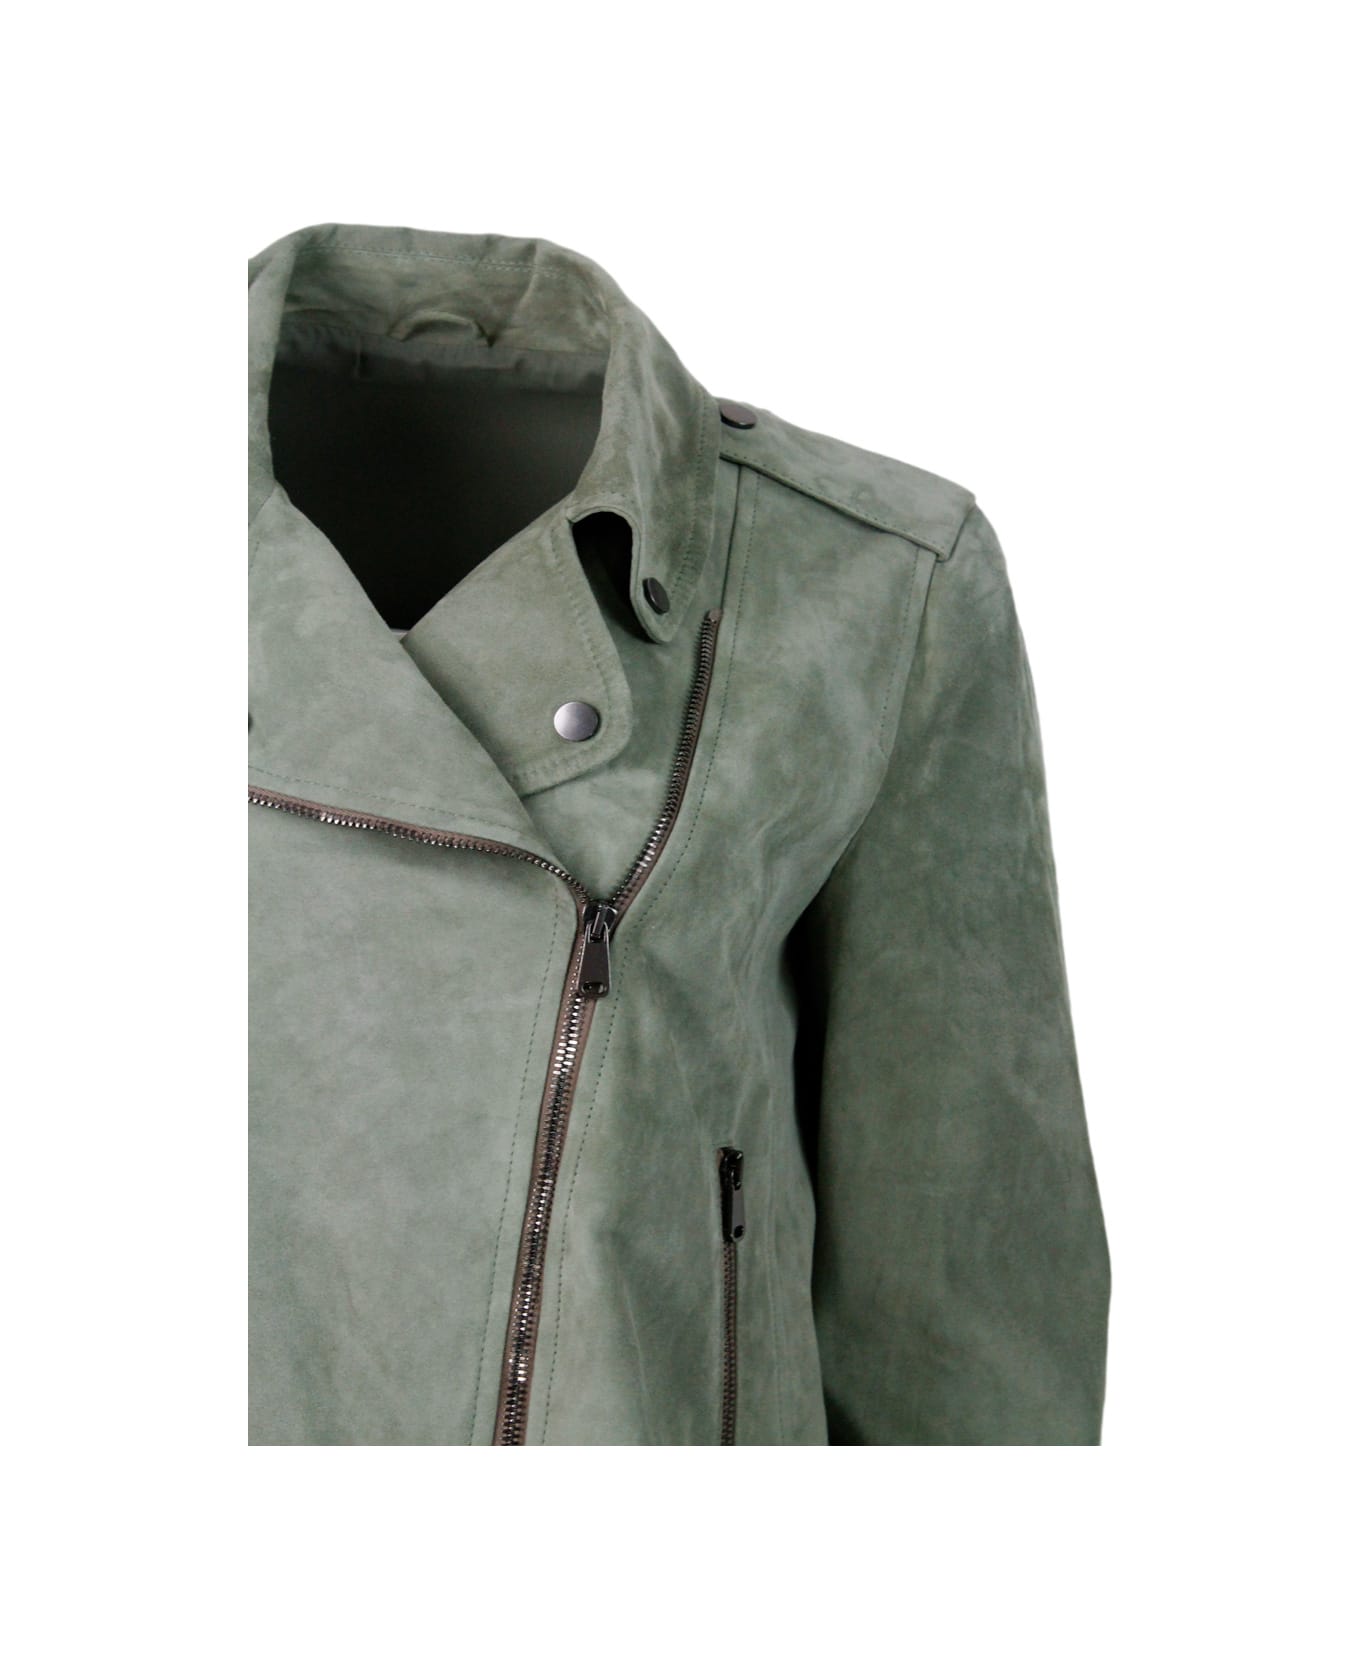 Brunello Cucinelli Biker Jacket In Precious And Soft Suede With Rows Of Brilliant Monili Behind The Neck - Green レザージャケット